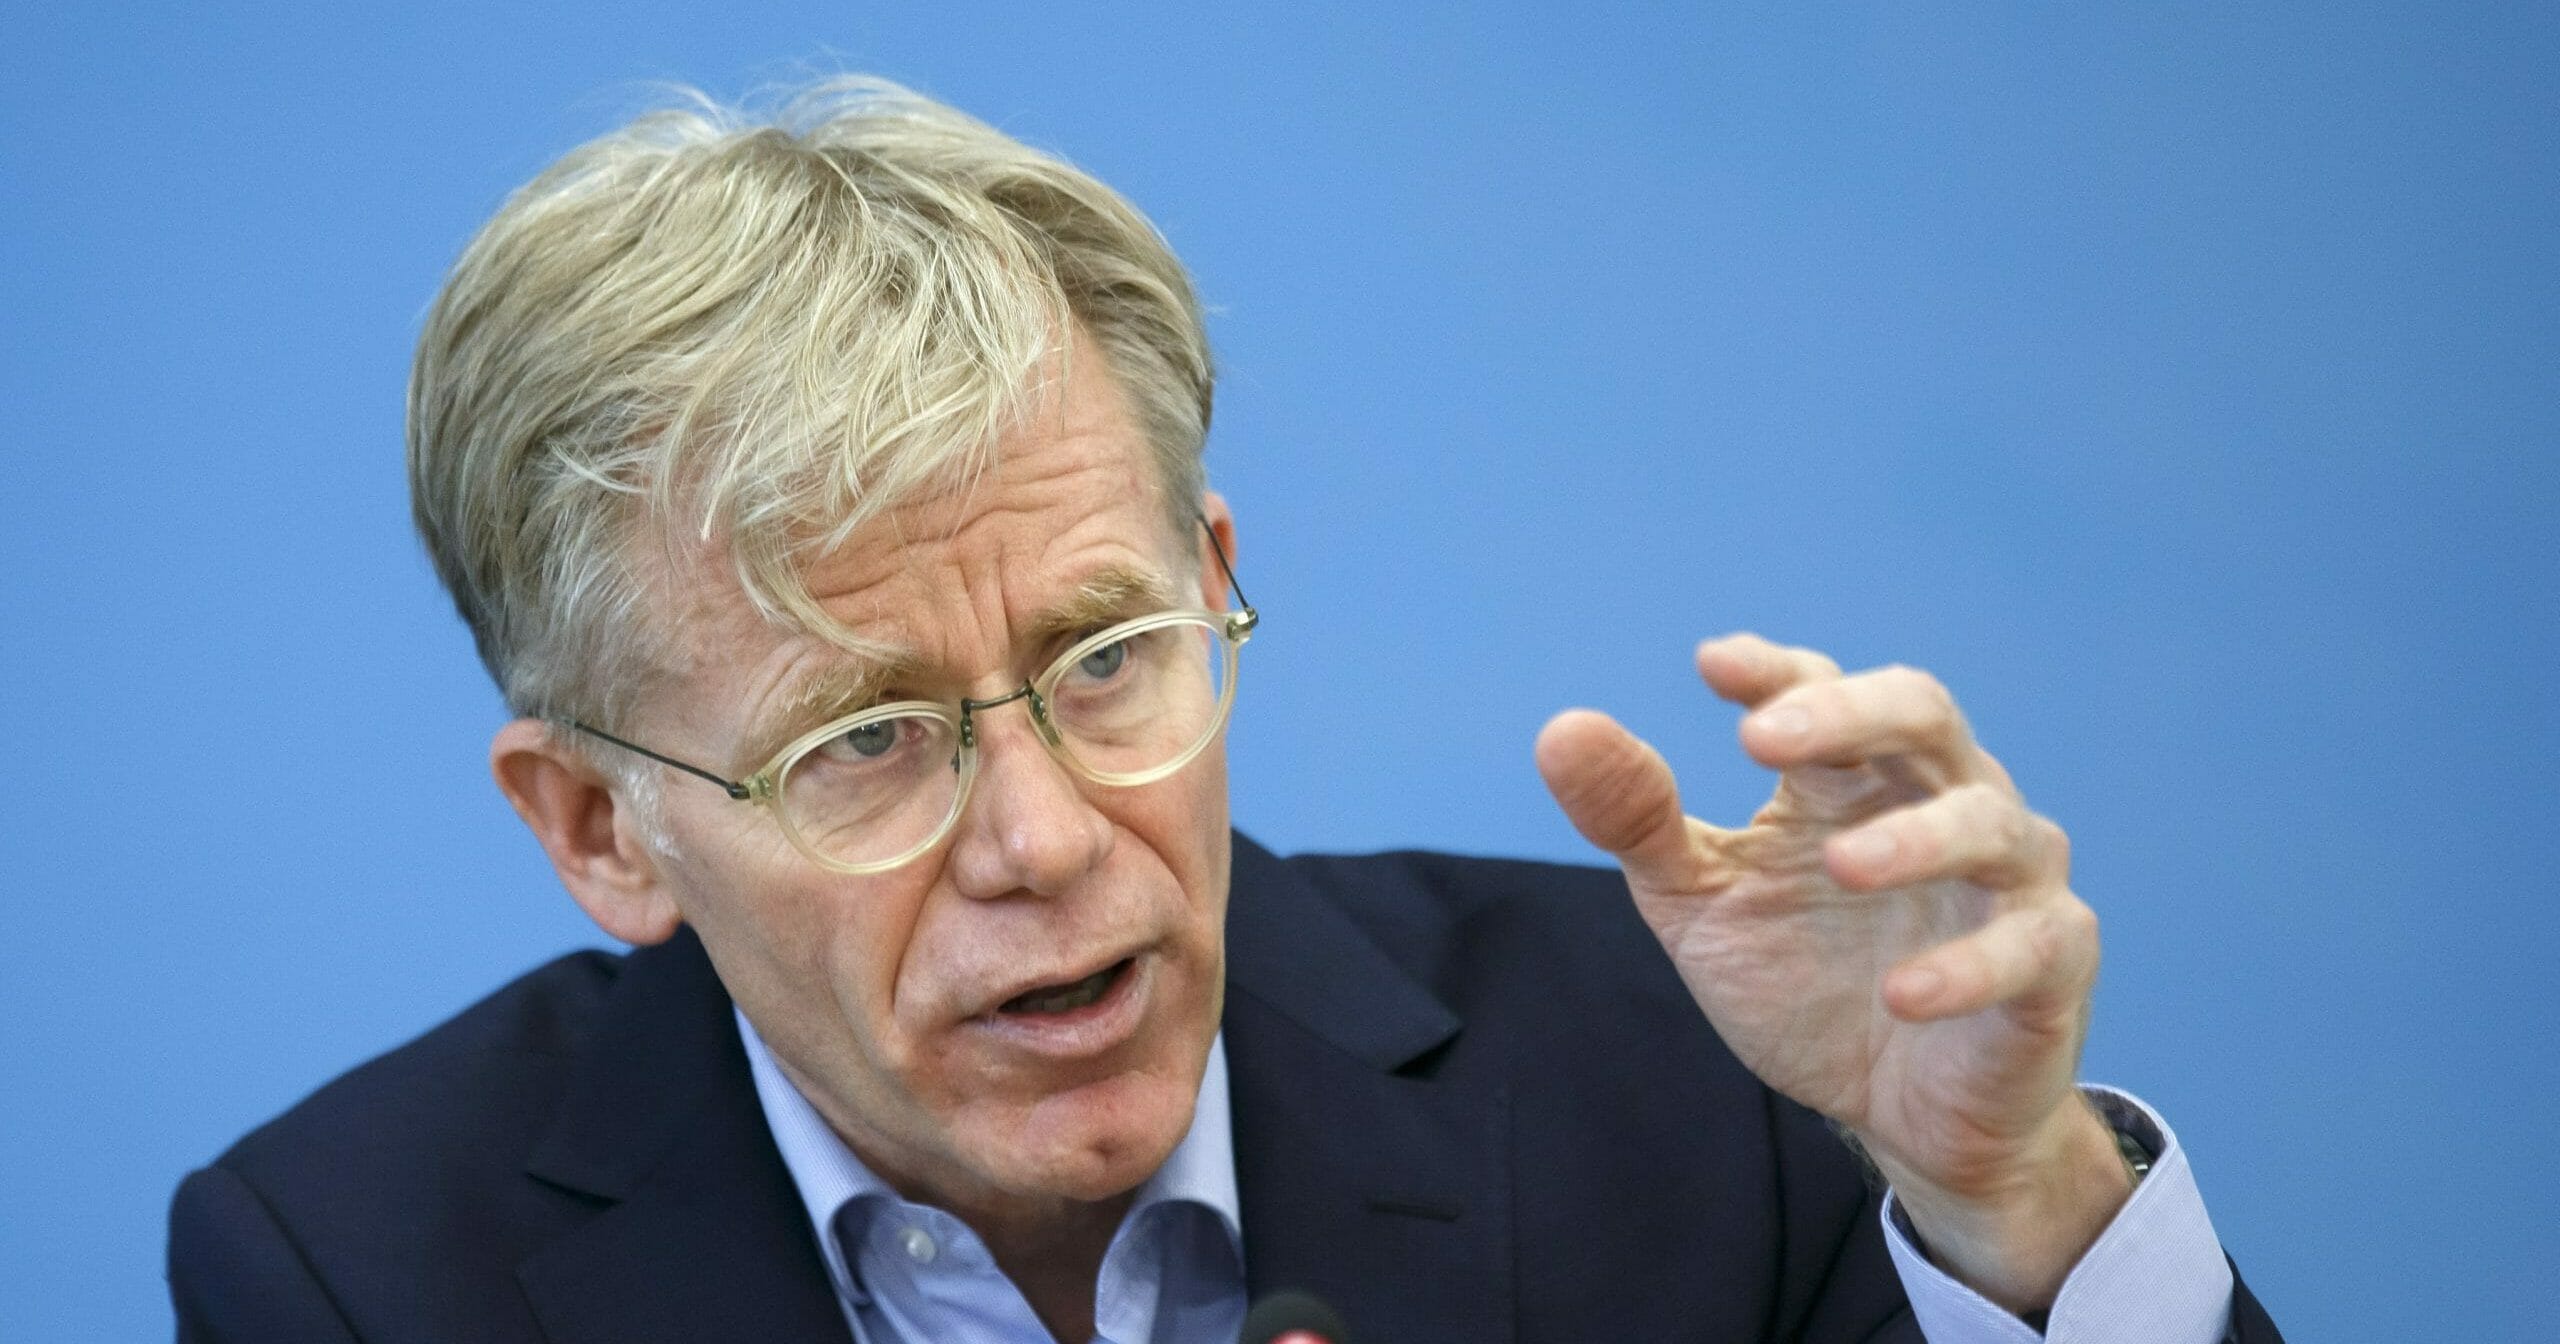 Bruce Aylward, the World Health Organization envoy who led a team of scientists just back from China, speaks to the media about COVID-19 during a news conference at the World Health Organization in Geneva on Feb. 25, 2020.